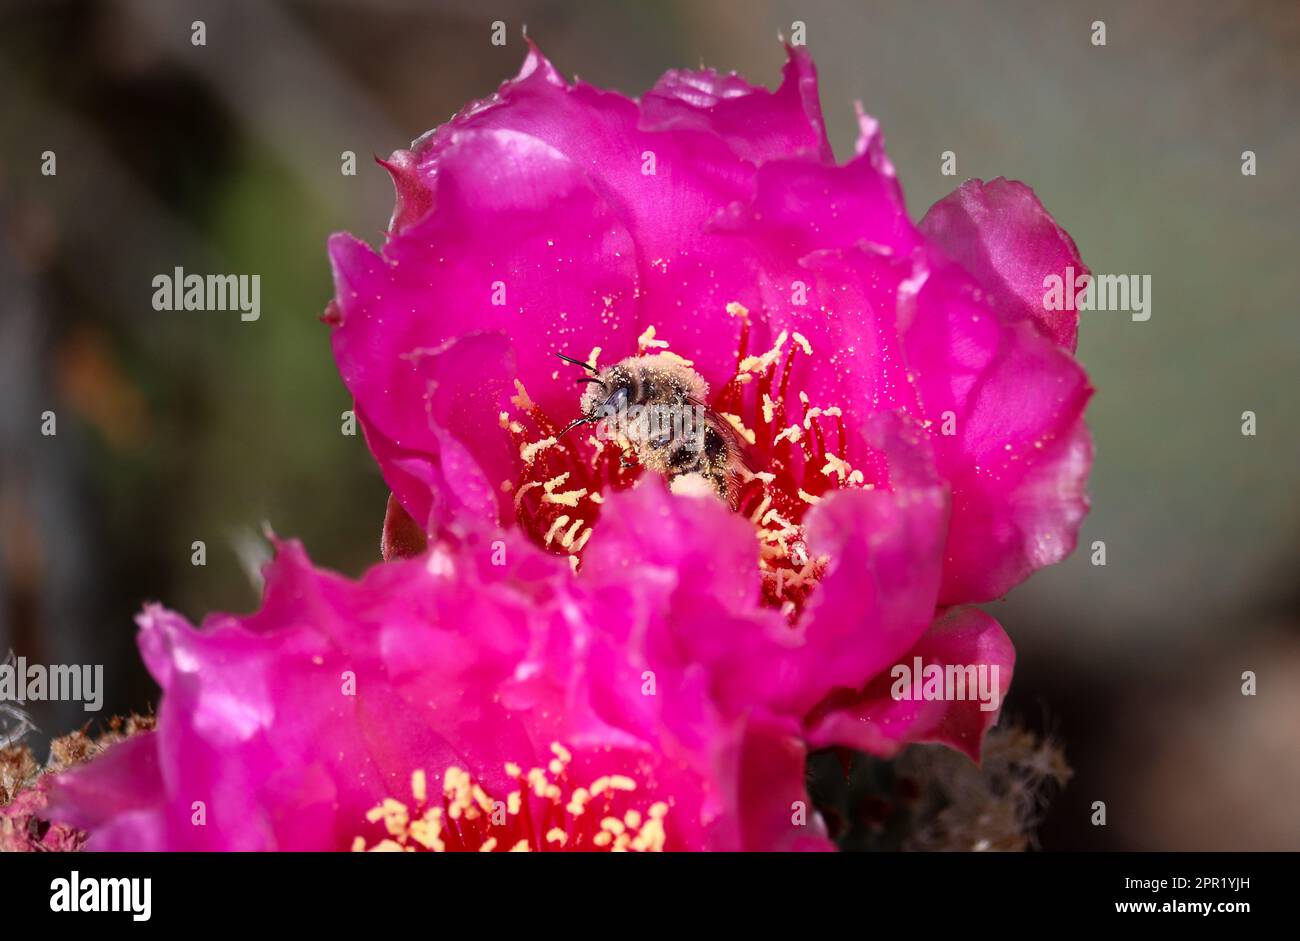 Close up of a beavertail prickly pear cactus or Opuntia basilaris flower with a cactus bee feeding on it at the Riparian. Stock Photo